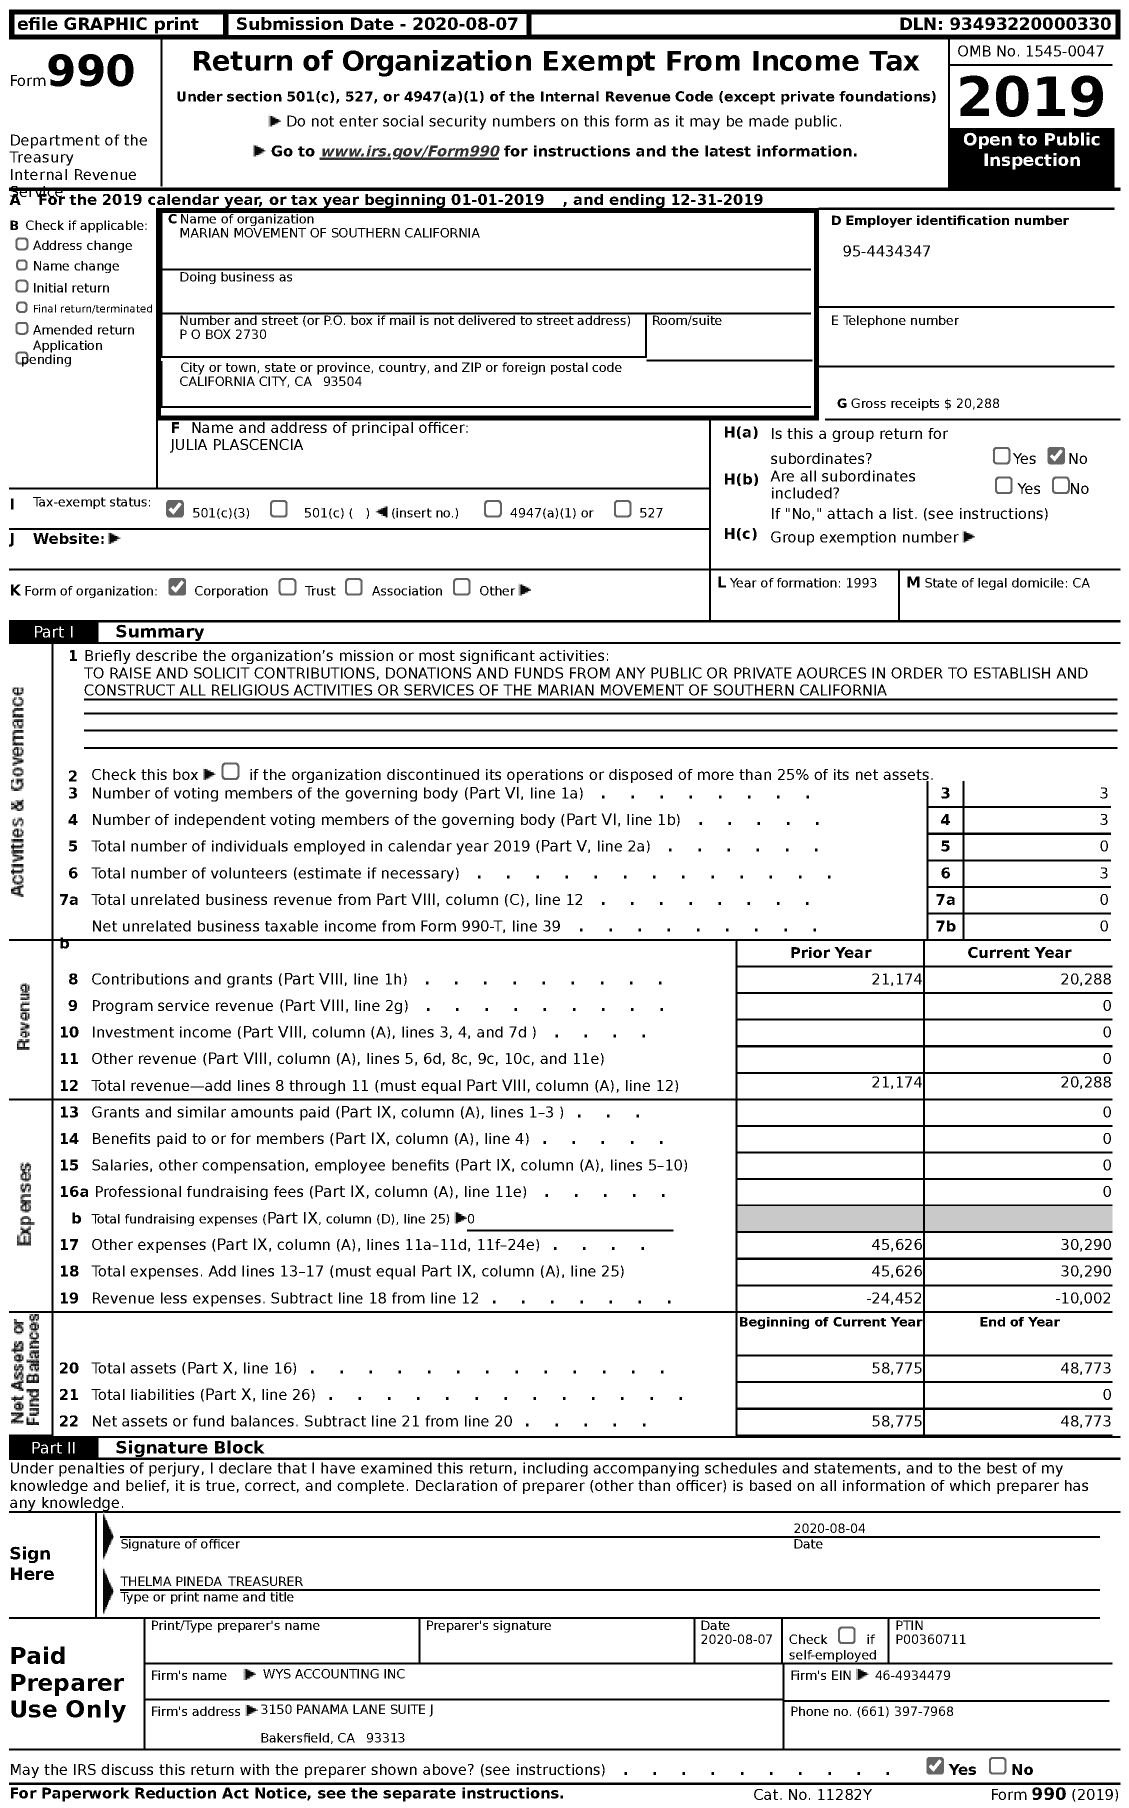 Image of first page of 2019 Form 990 for Marian Movement of Southern California